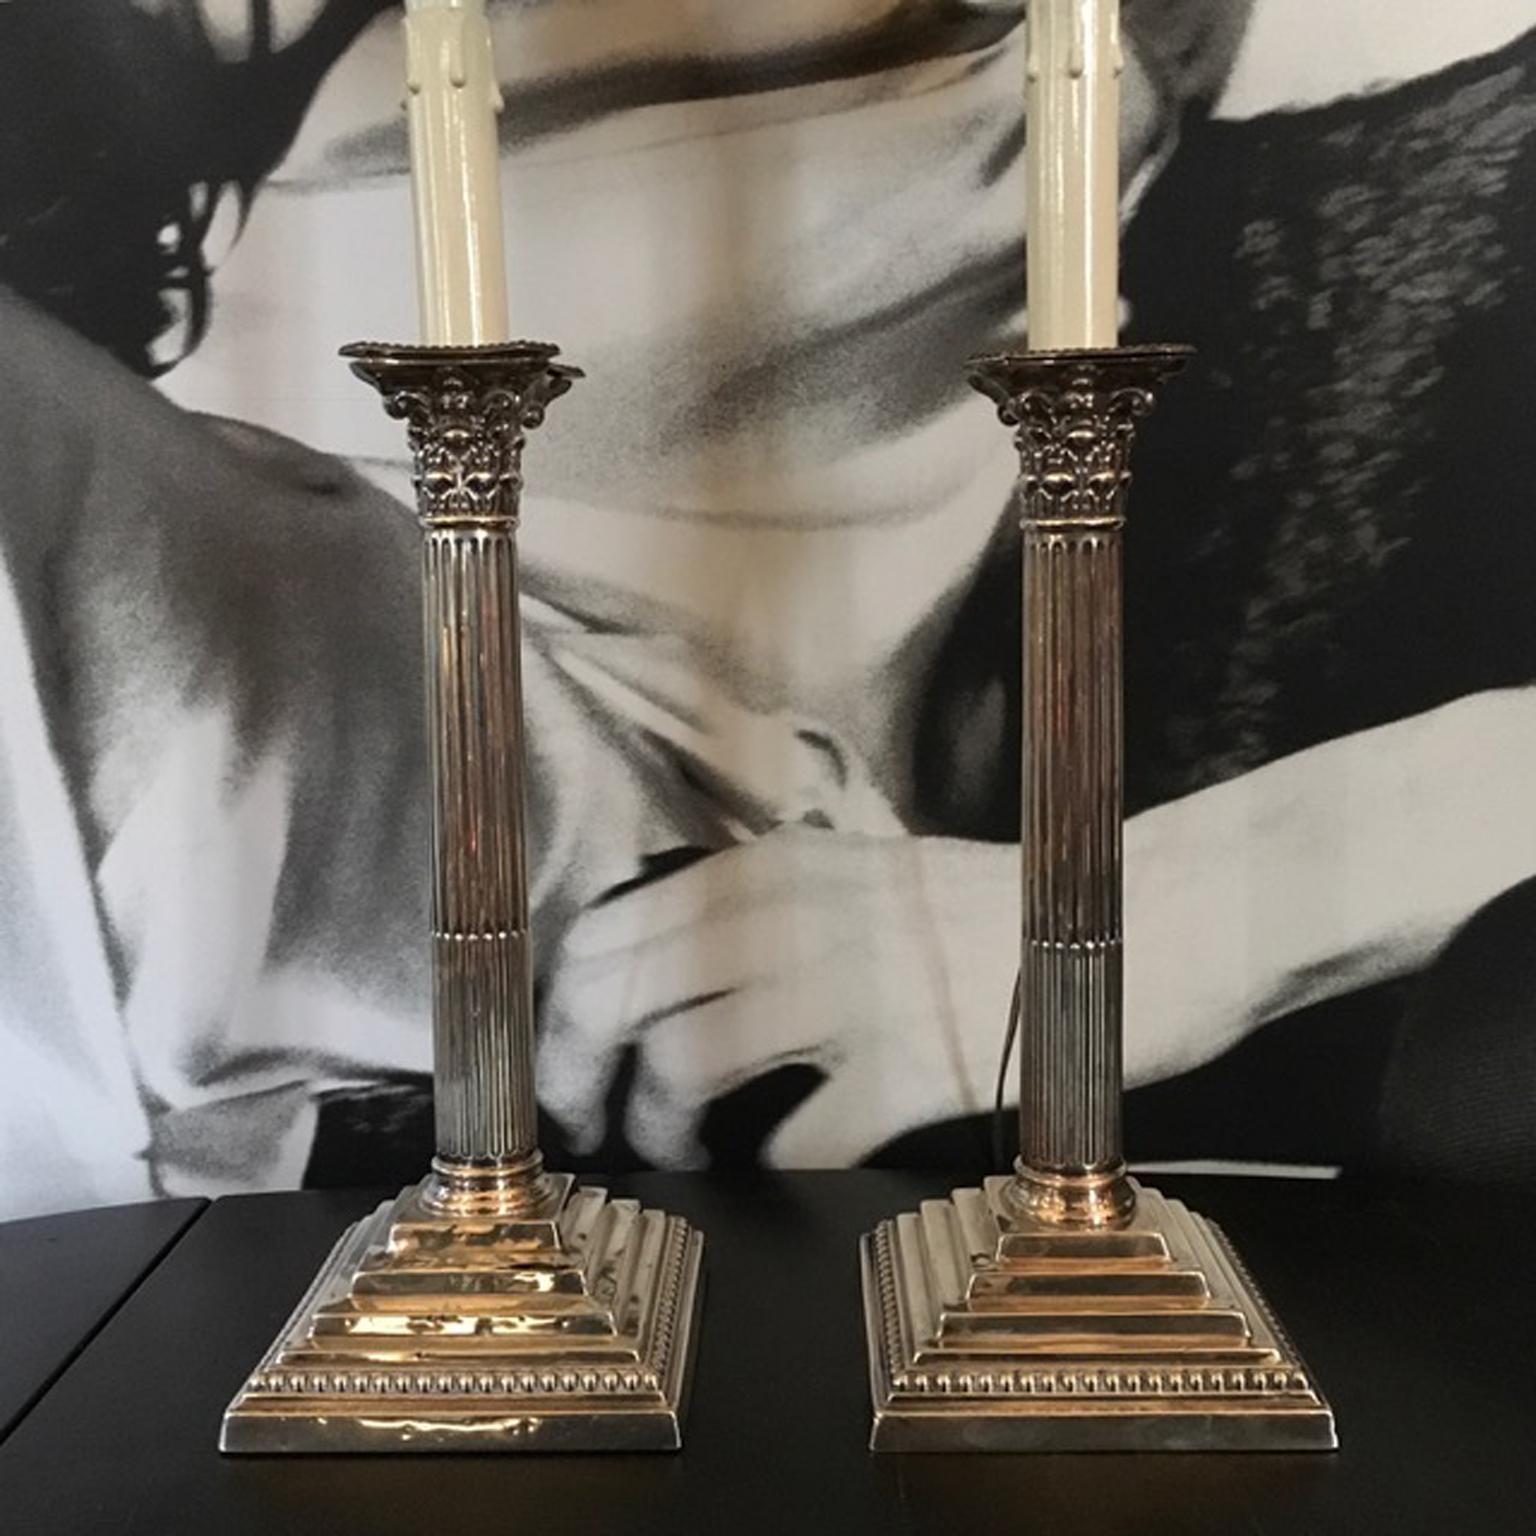 England pair of neoclassical style silver candleholders table lamps, circa 1890.

This fine pair of neoclassical silver candleholder, is electrified and it becomes an elegant couple of table lamps. For their slim dimensions are perfect to be put